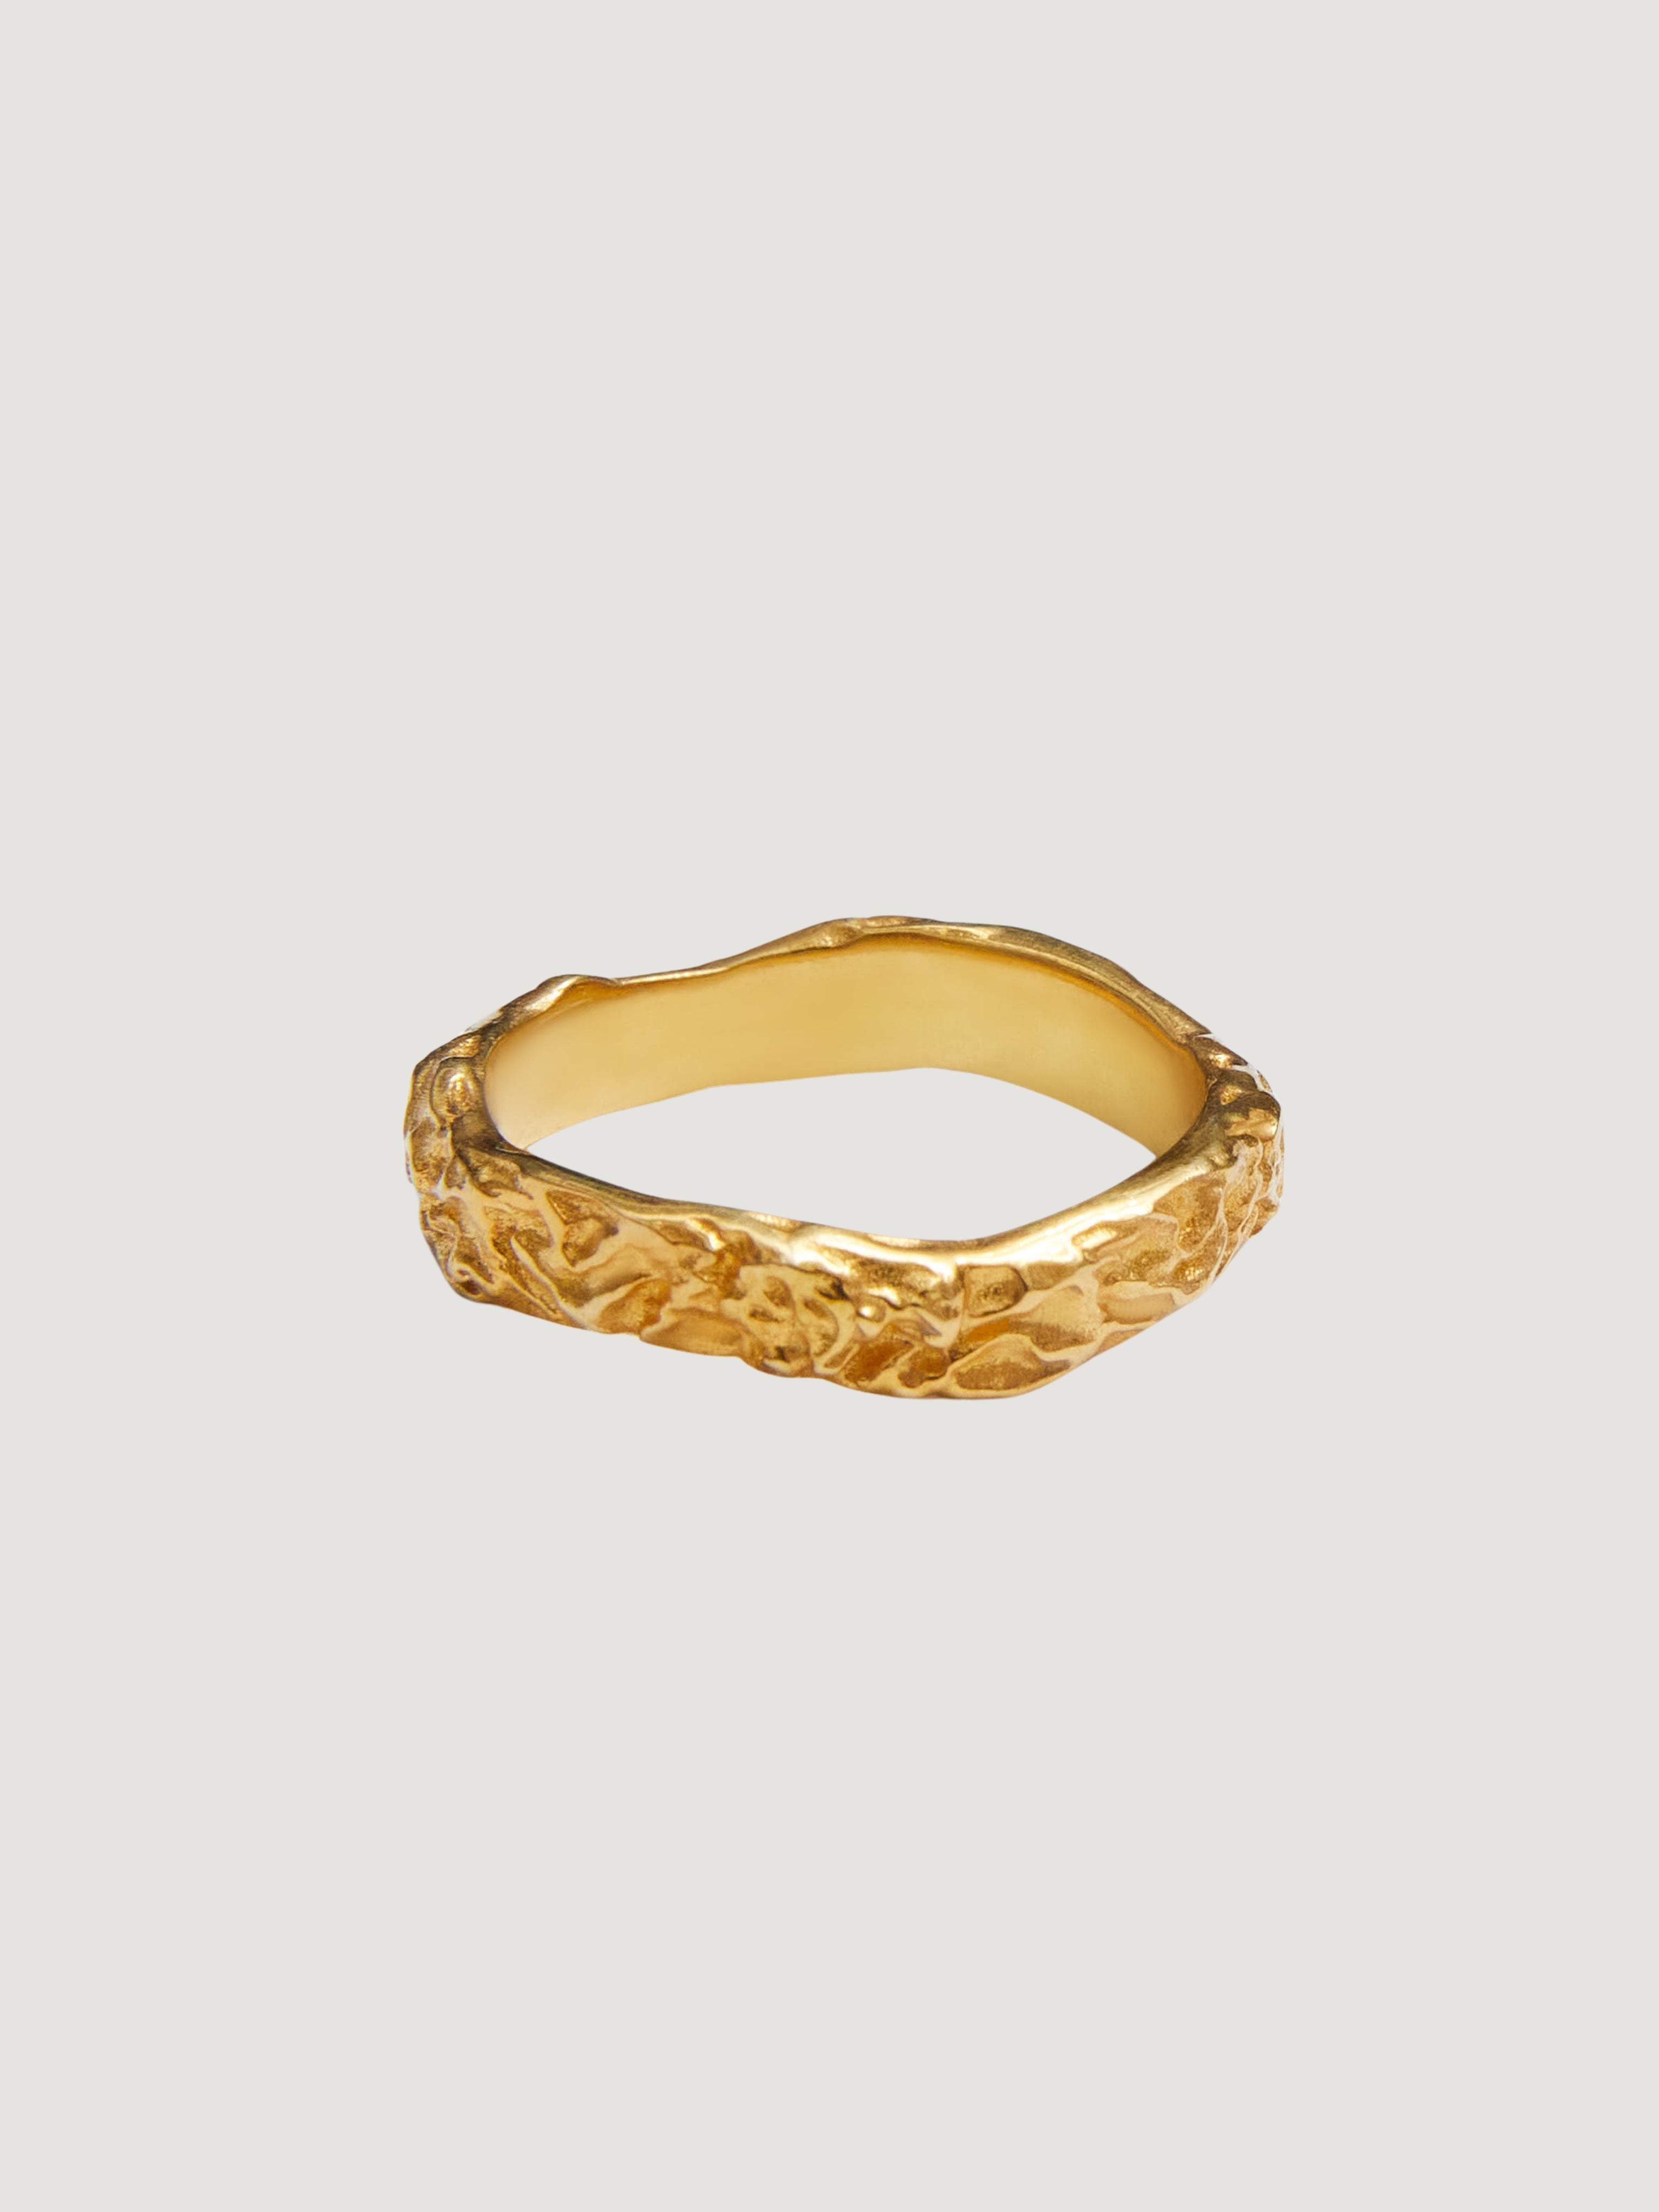 SMALL EVERYDAY RING GOLD - ATTODE